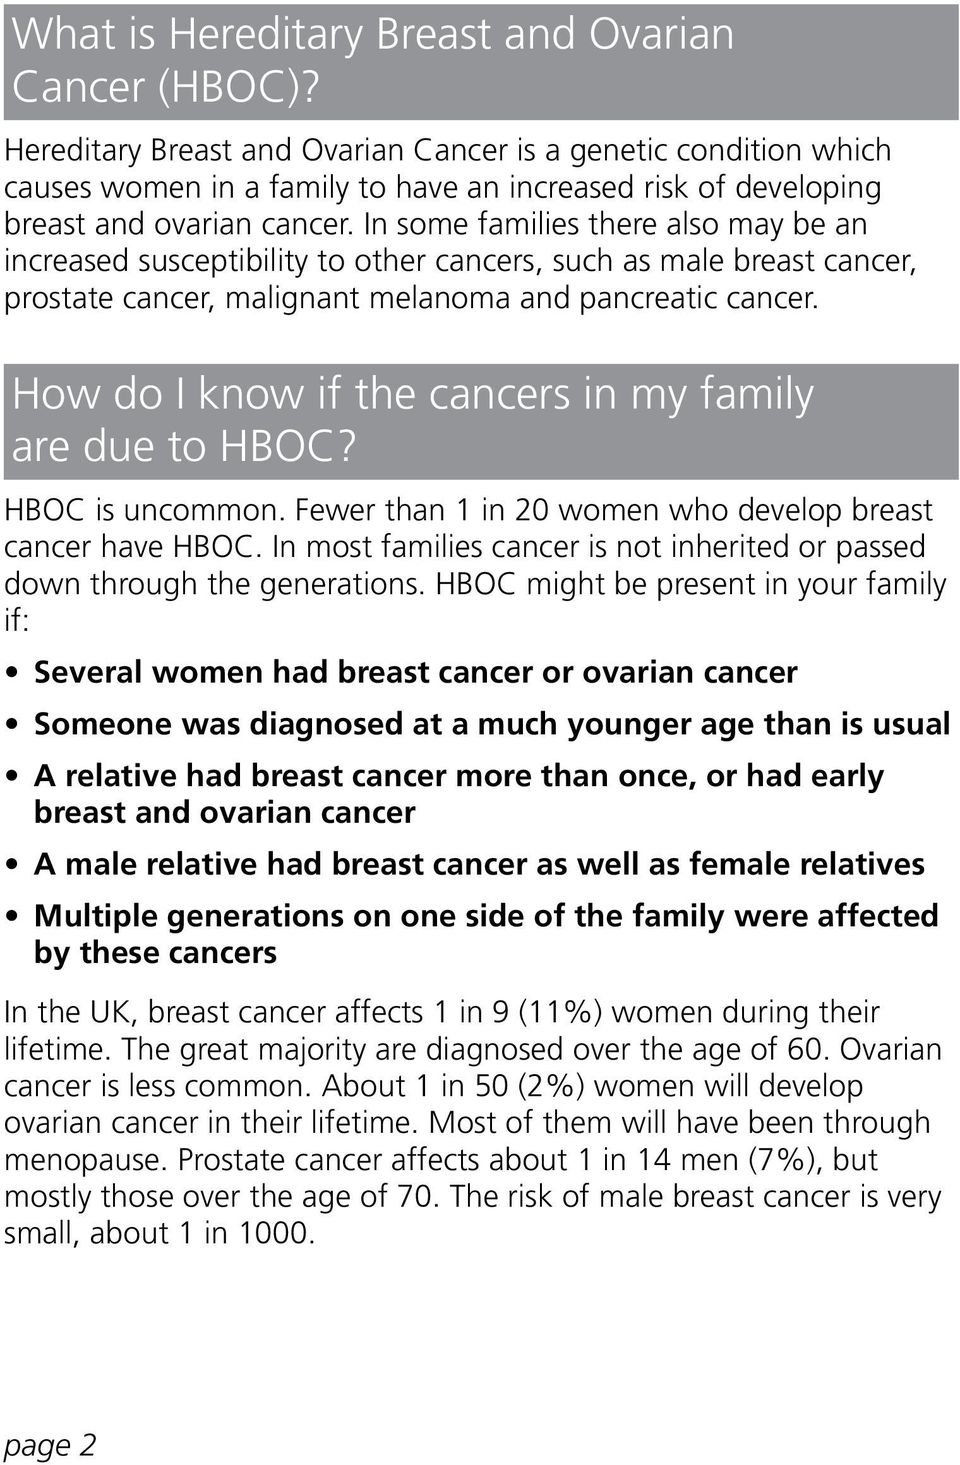 In some families there also may be an increased susceptibility to other cancers, such as male breast cancer, prostate cancer, malignant melanoma and pancreatic cancer.